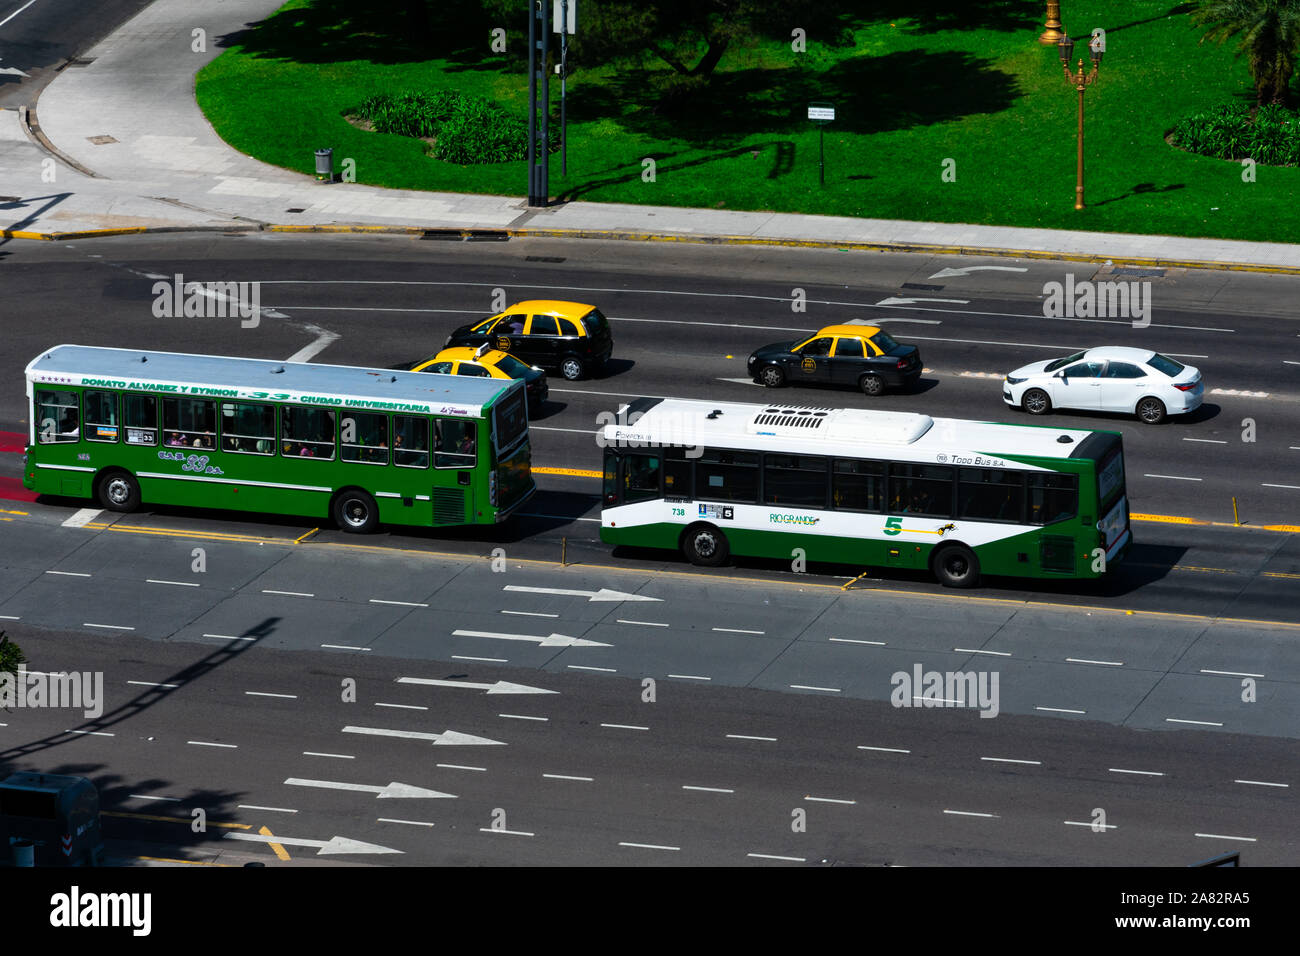 Buenos Aires, Argentina. October 26, 2019. View of two typical public transport buses (Colectivos) Stock Photo